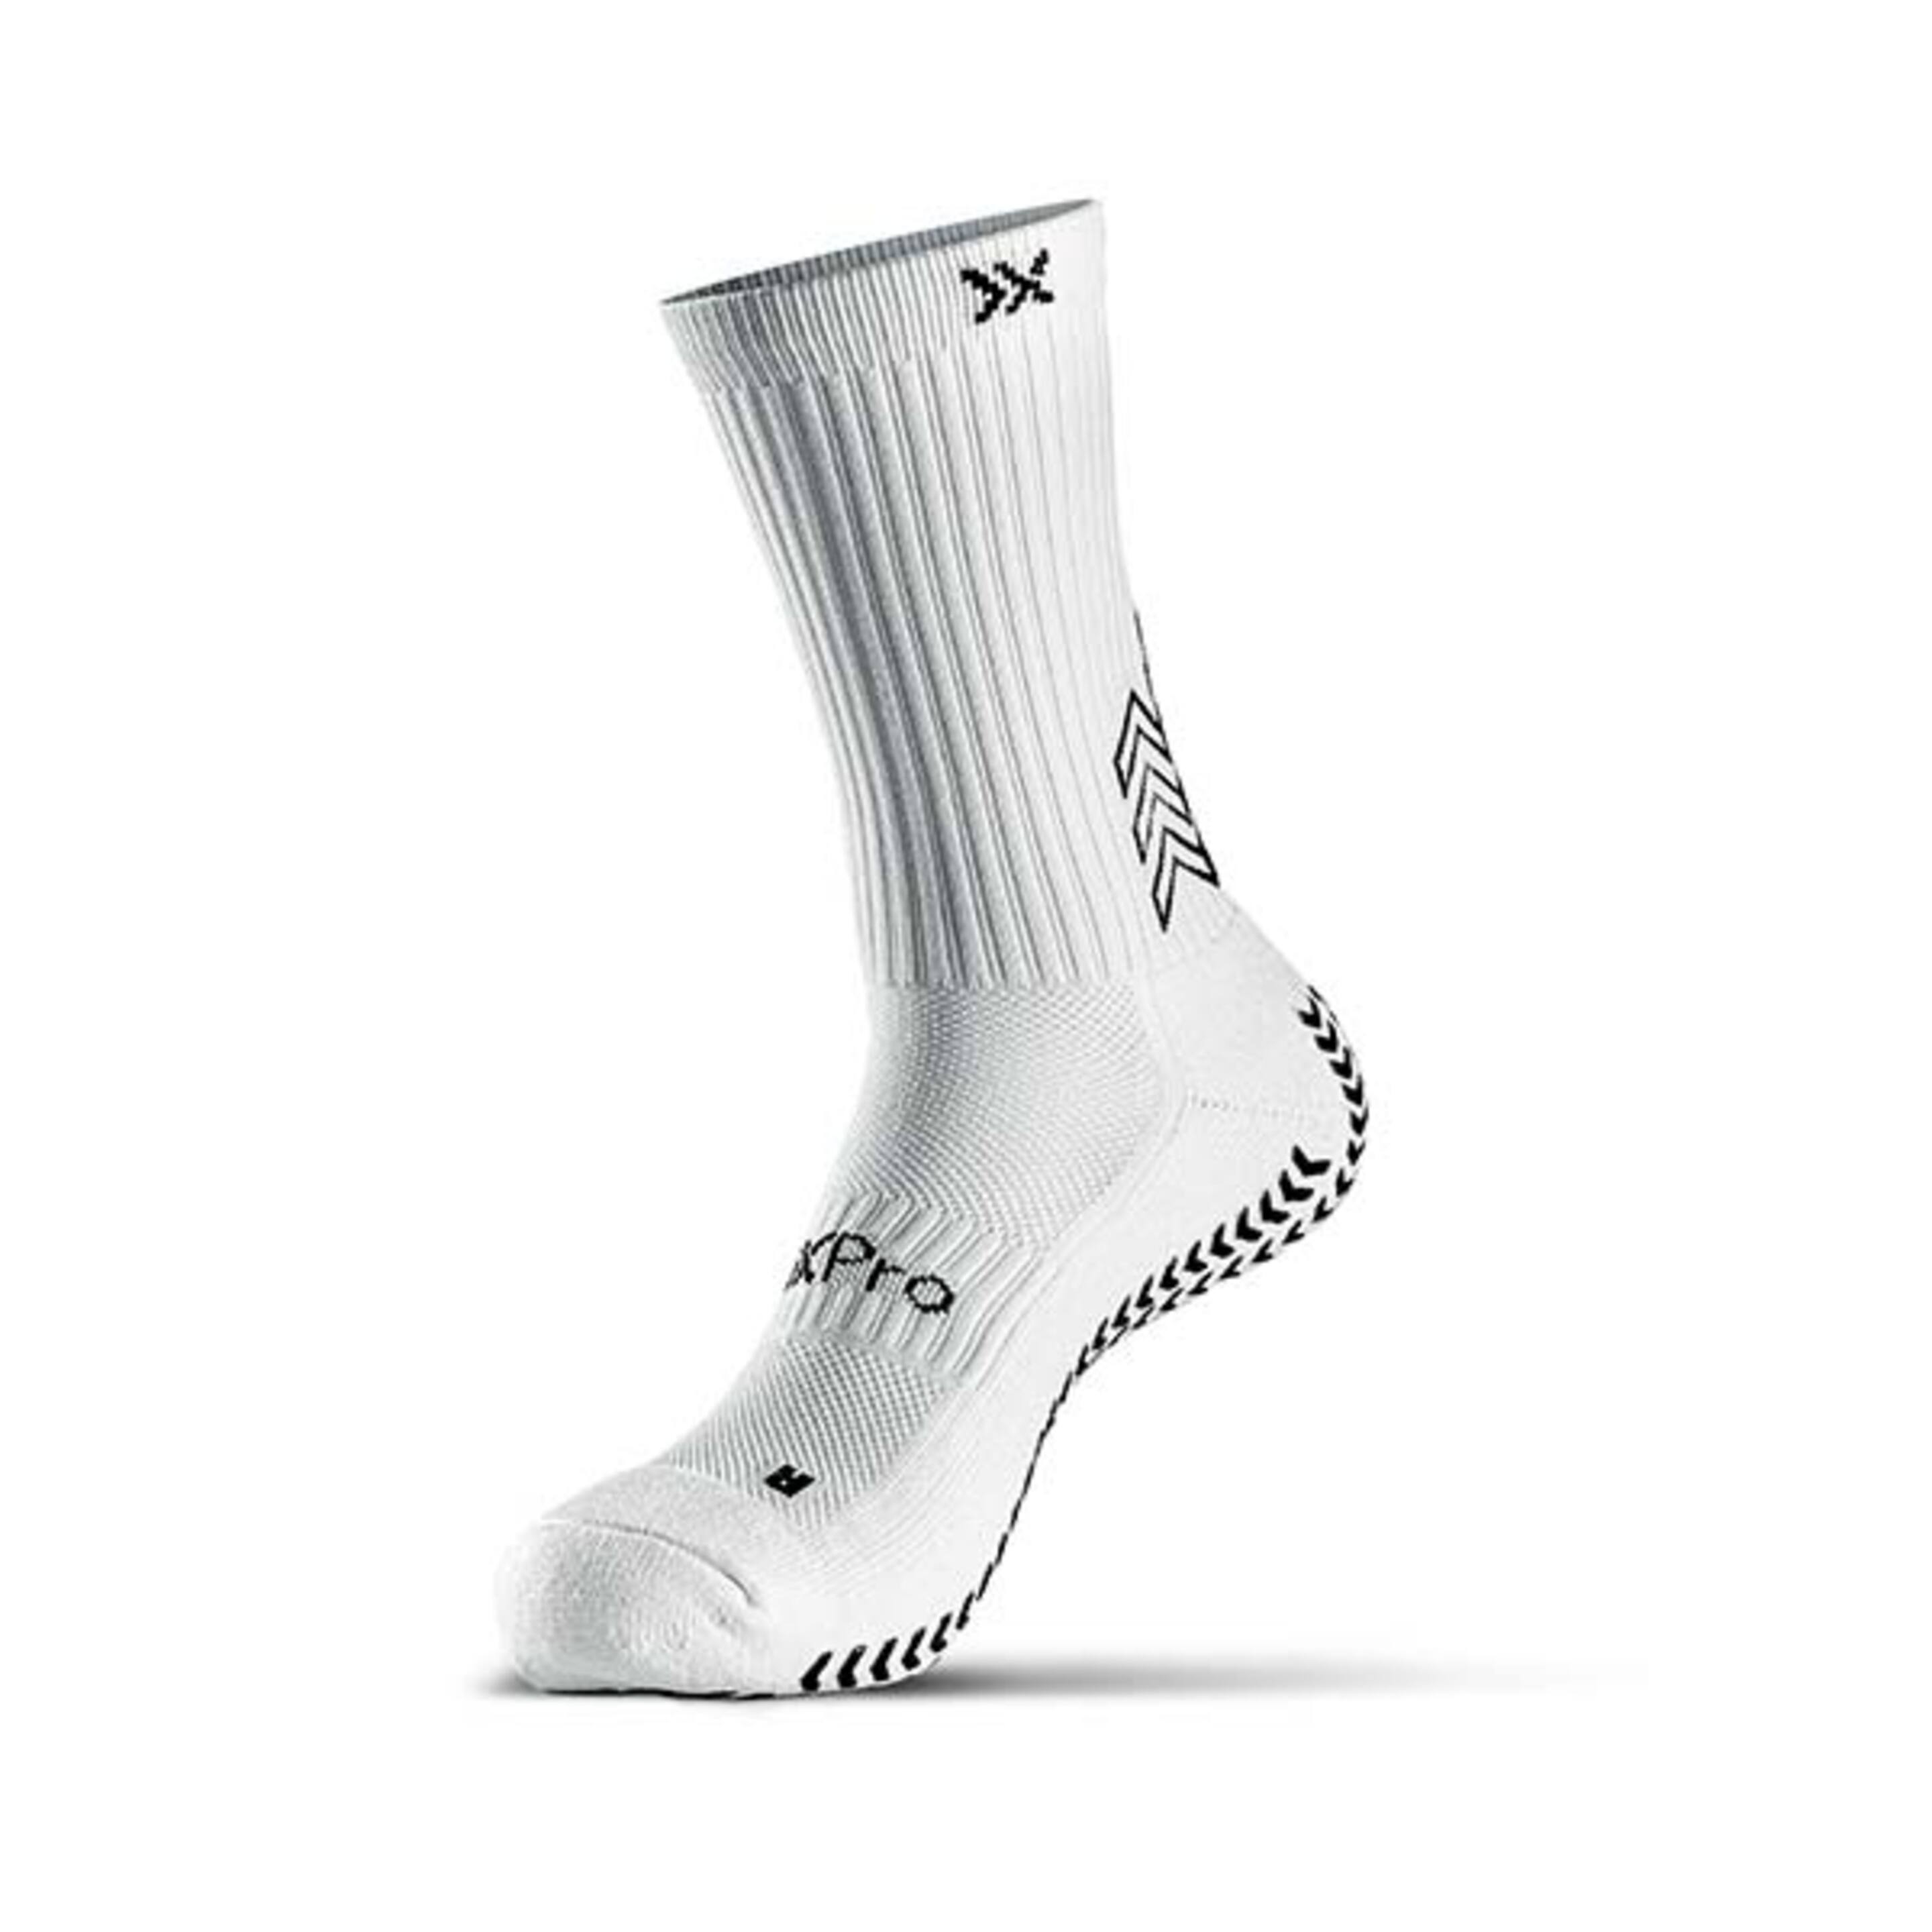 Calcetines Soxpro Classic - blanco - 